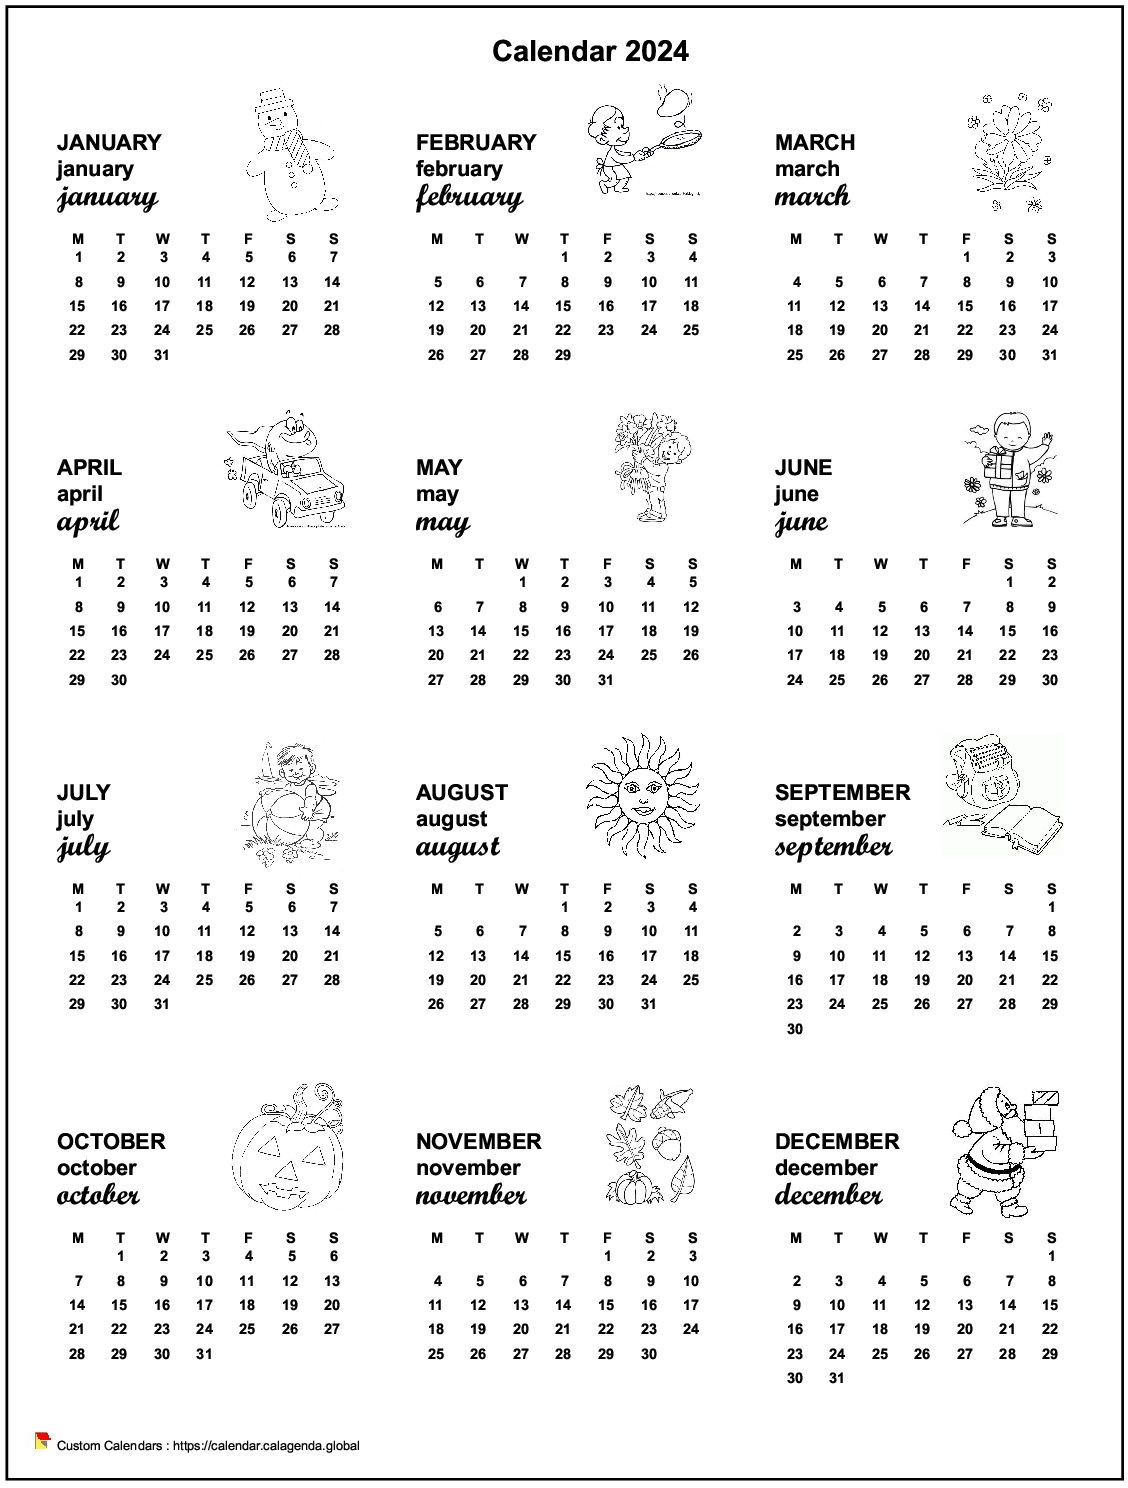 Calendar 2024 annual maternal and primary school